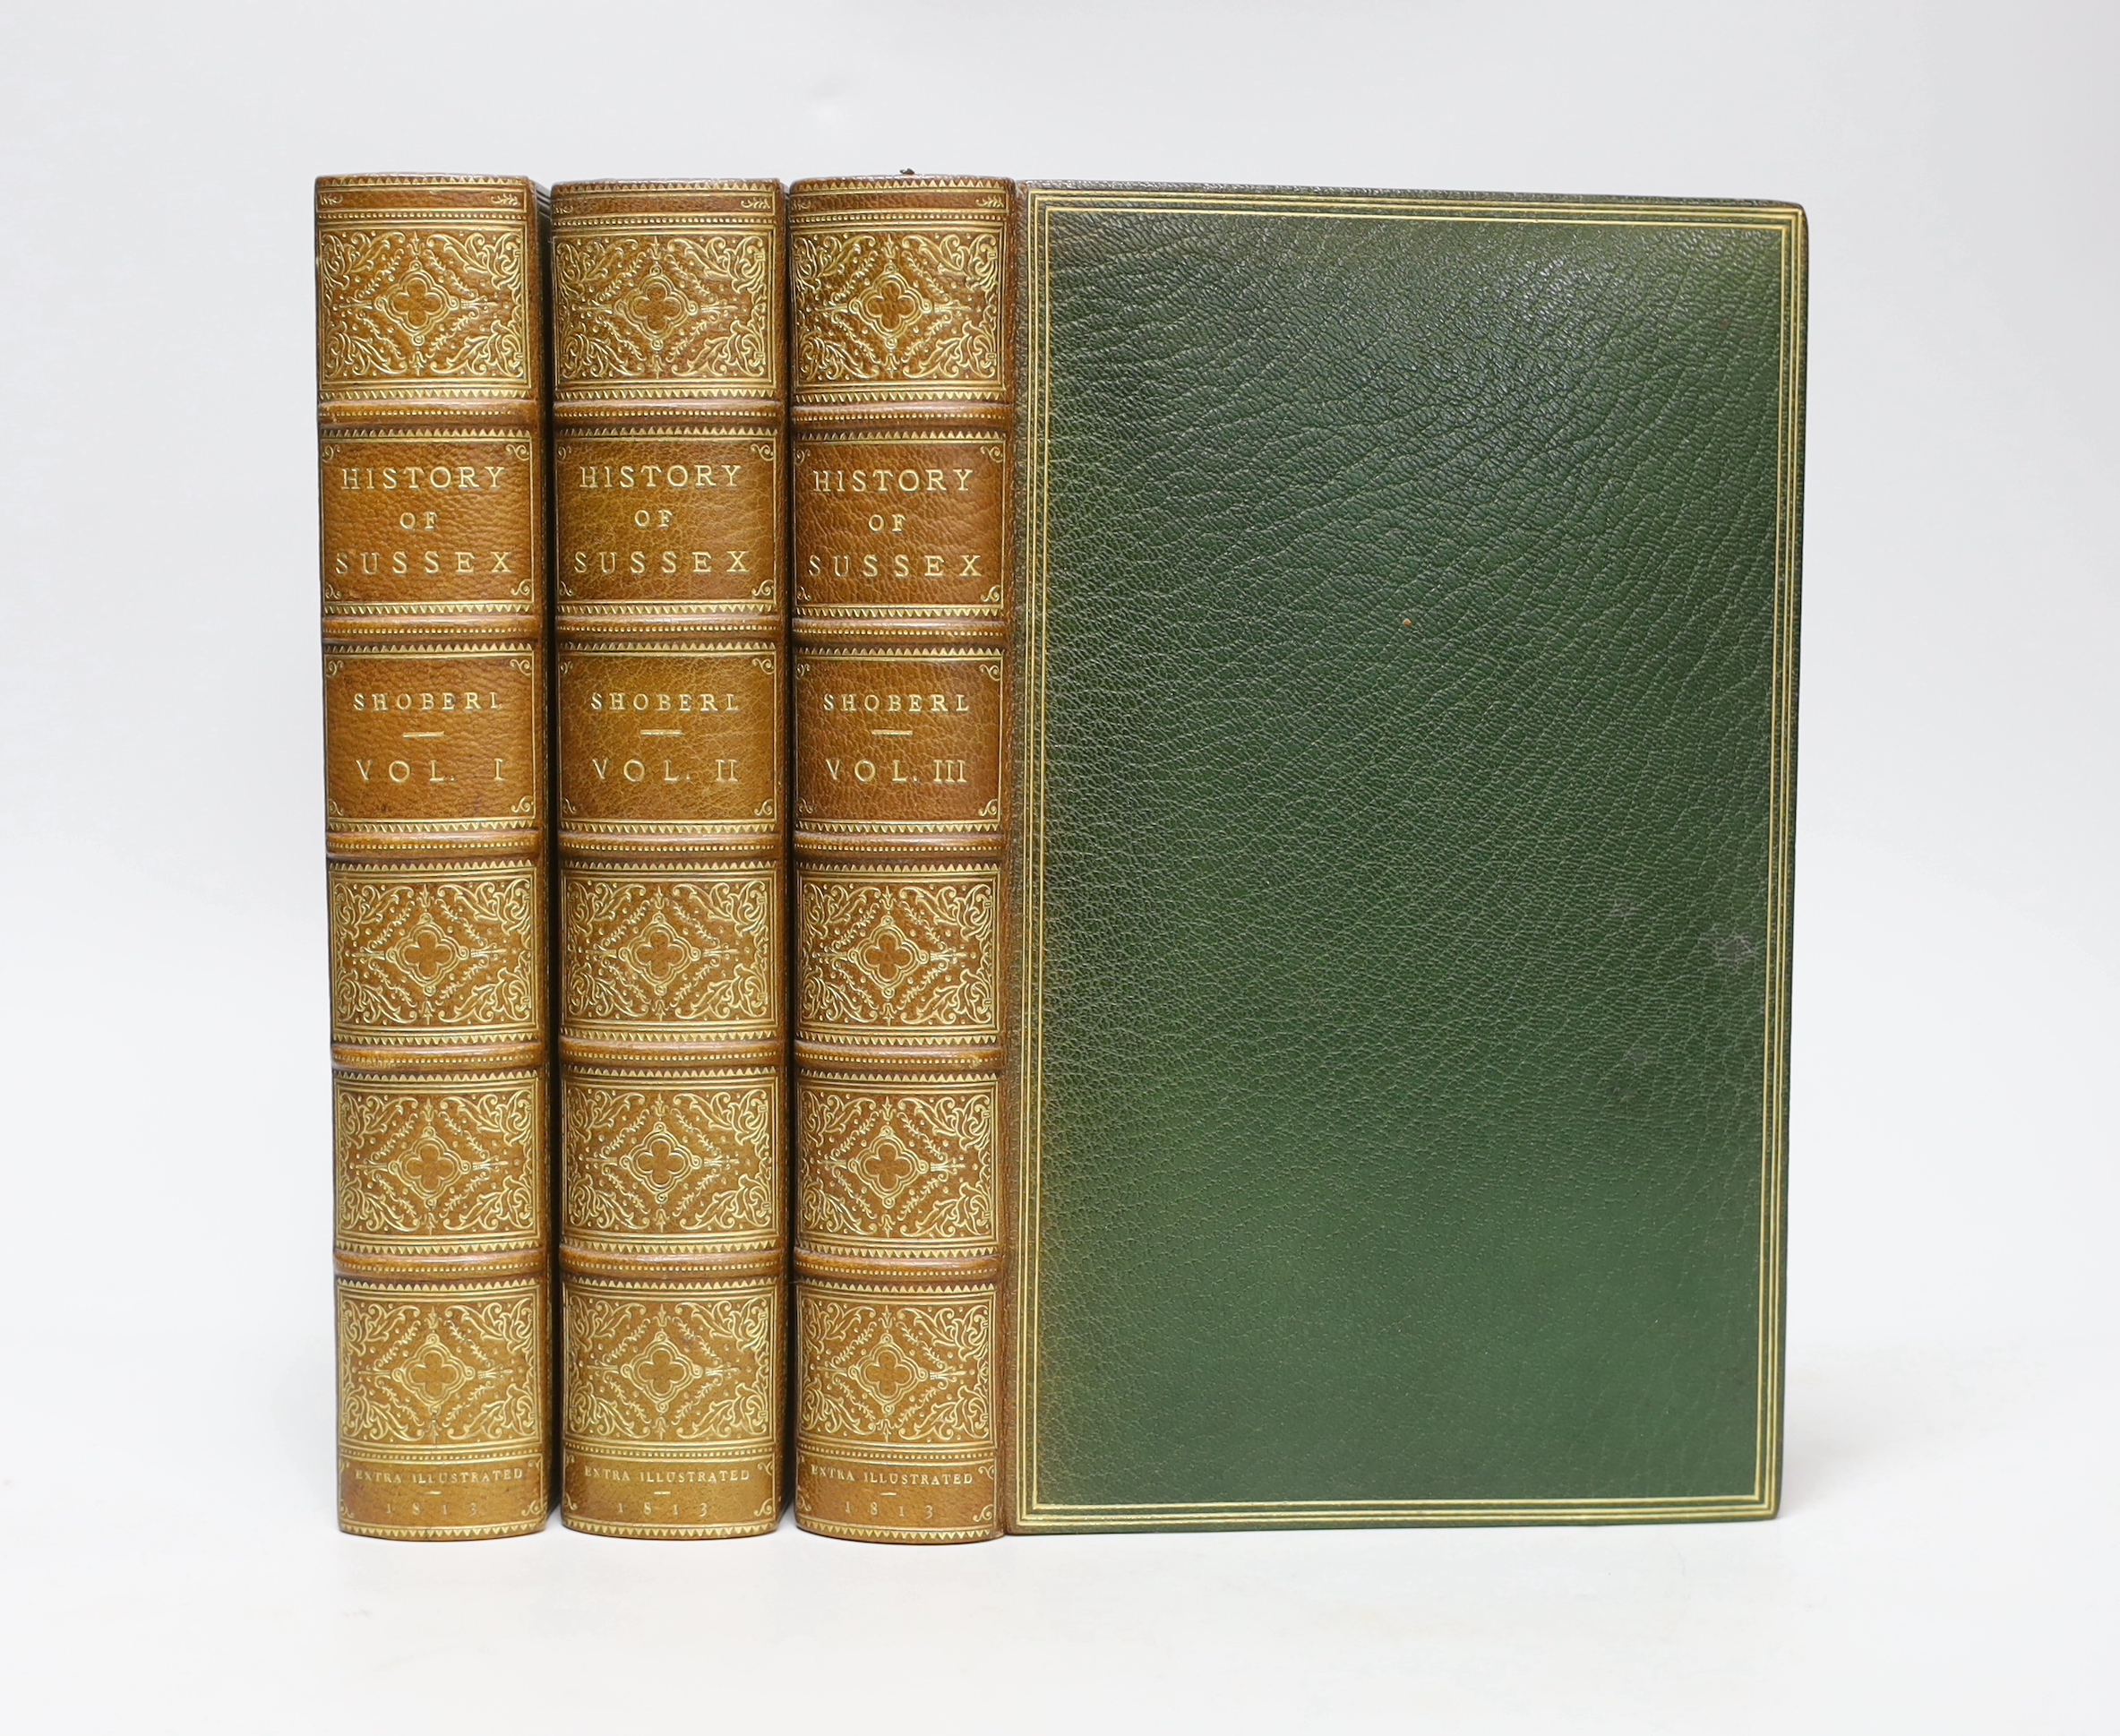 SUSSEX - Shoberl, Frederick - A Topological and Historical Description of the County of Sussex, 3 vols, extra illustrated from other works, 8vo, fine green morocco gilt by Lucien Broca, with marbled endpapers, with 6 map